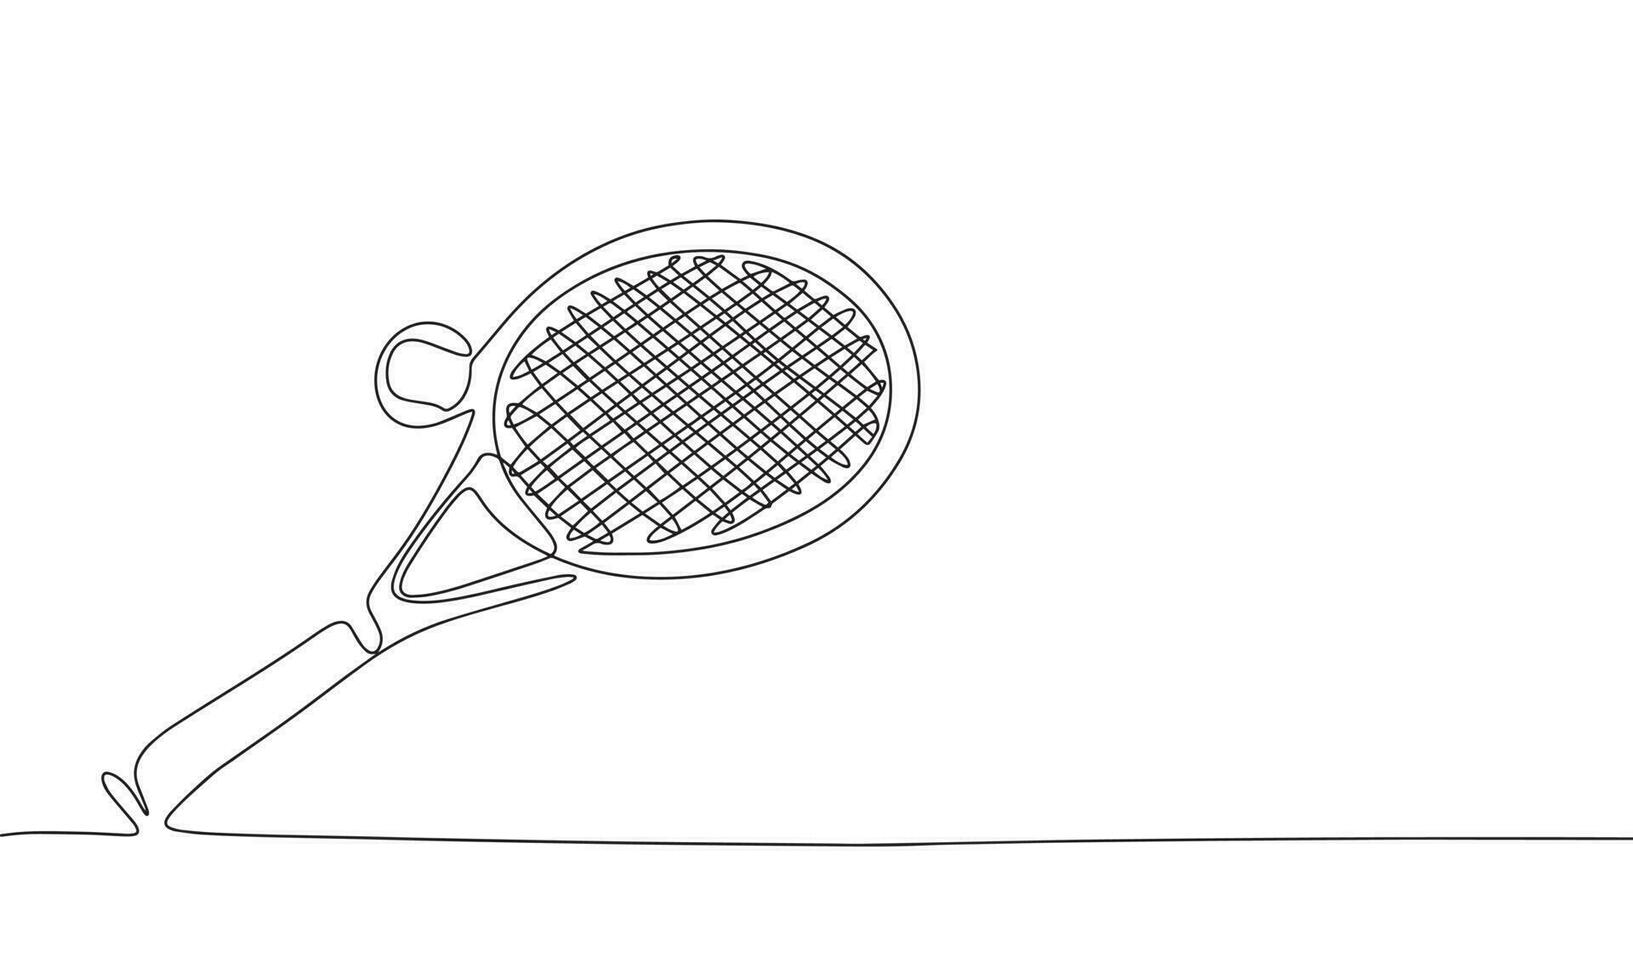 A tennis racket and ball in one line continuous style. Line art outline tennis game vector illustration.